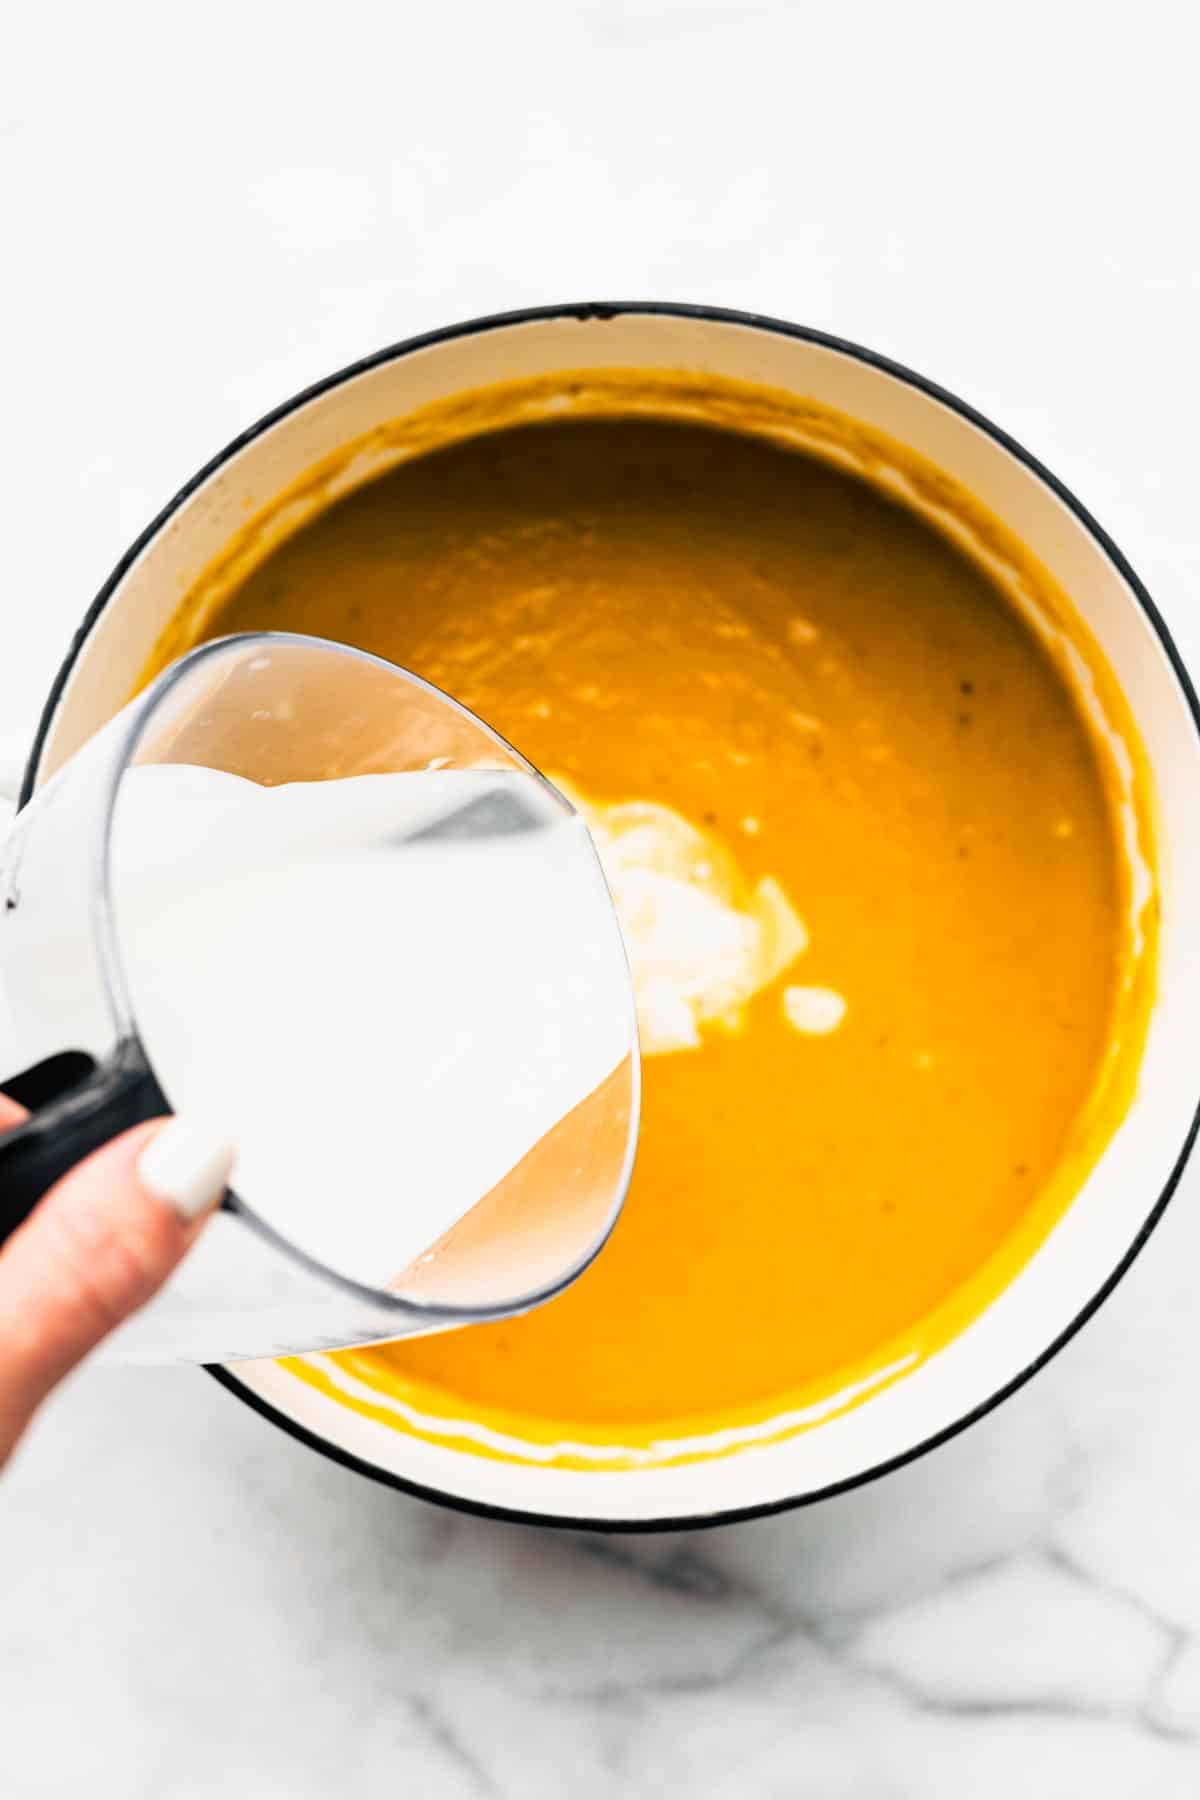 Creamy coconut milk being poured into a pot of vegan butternut squash soup.